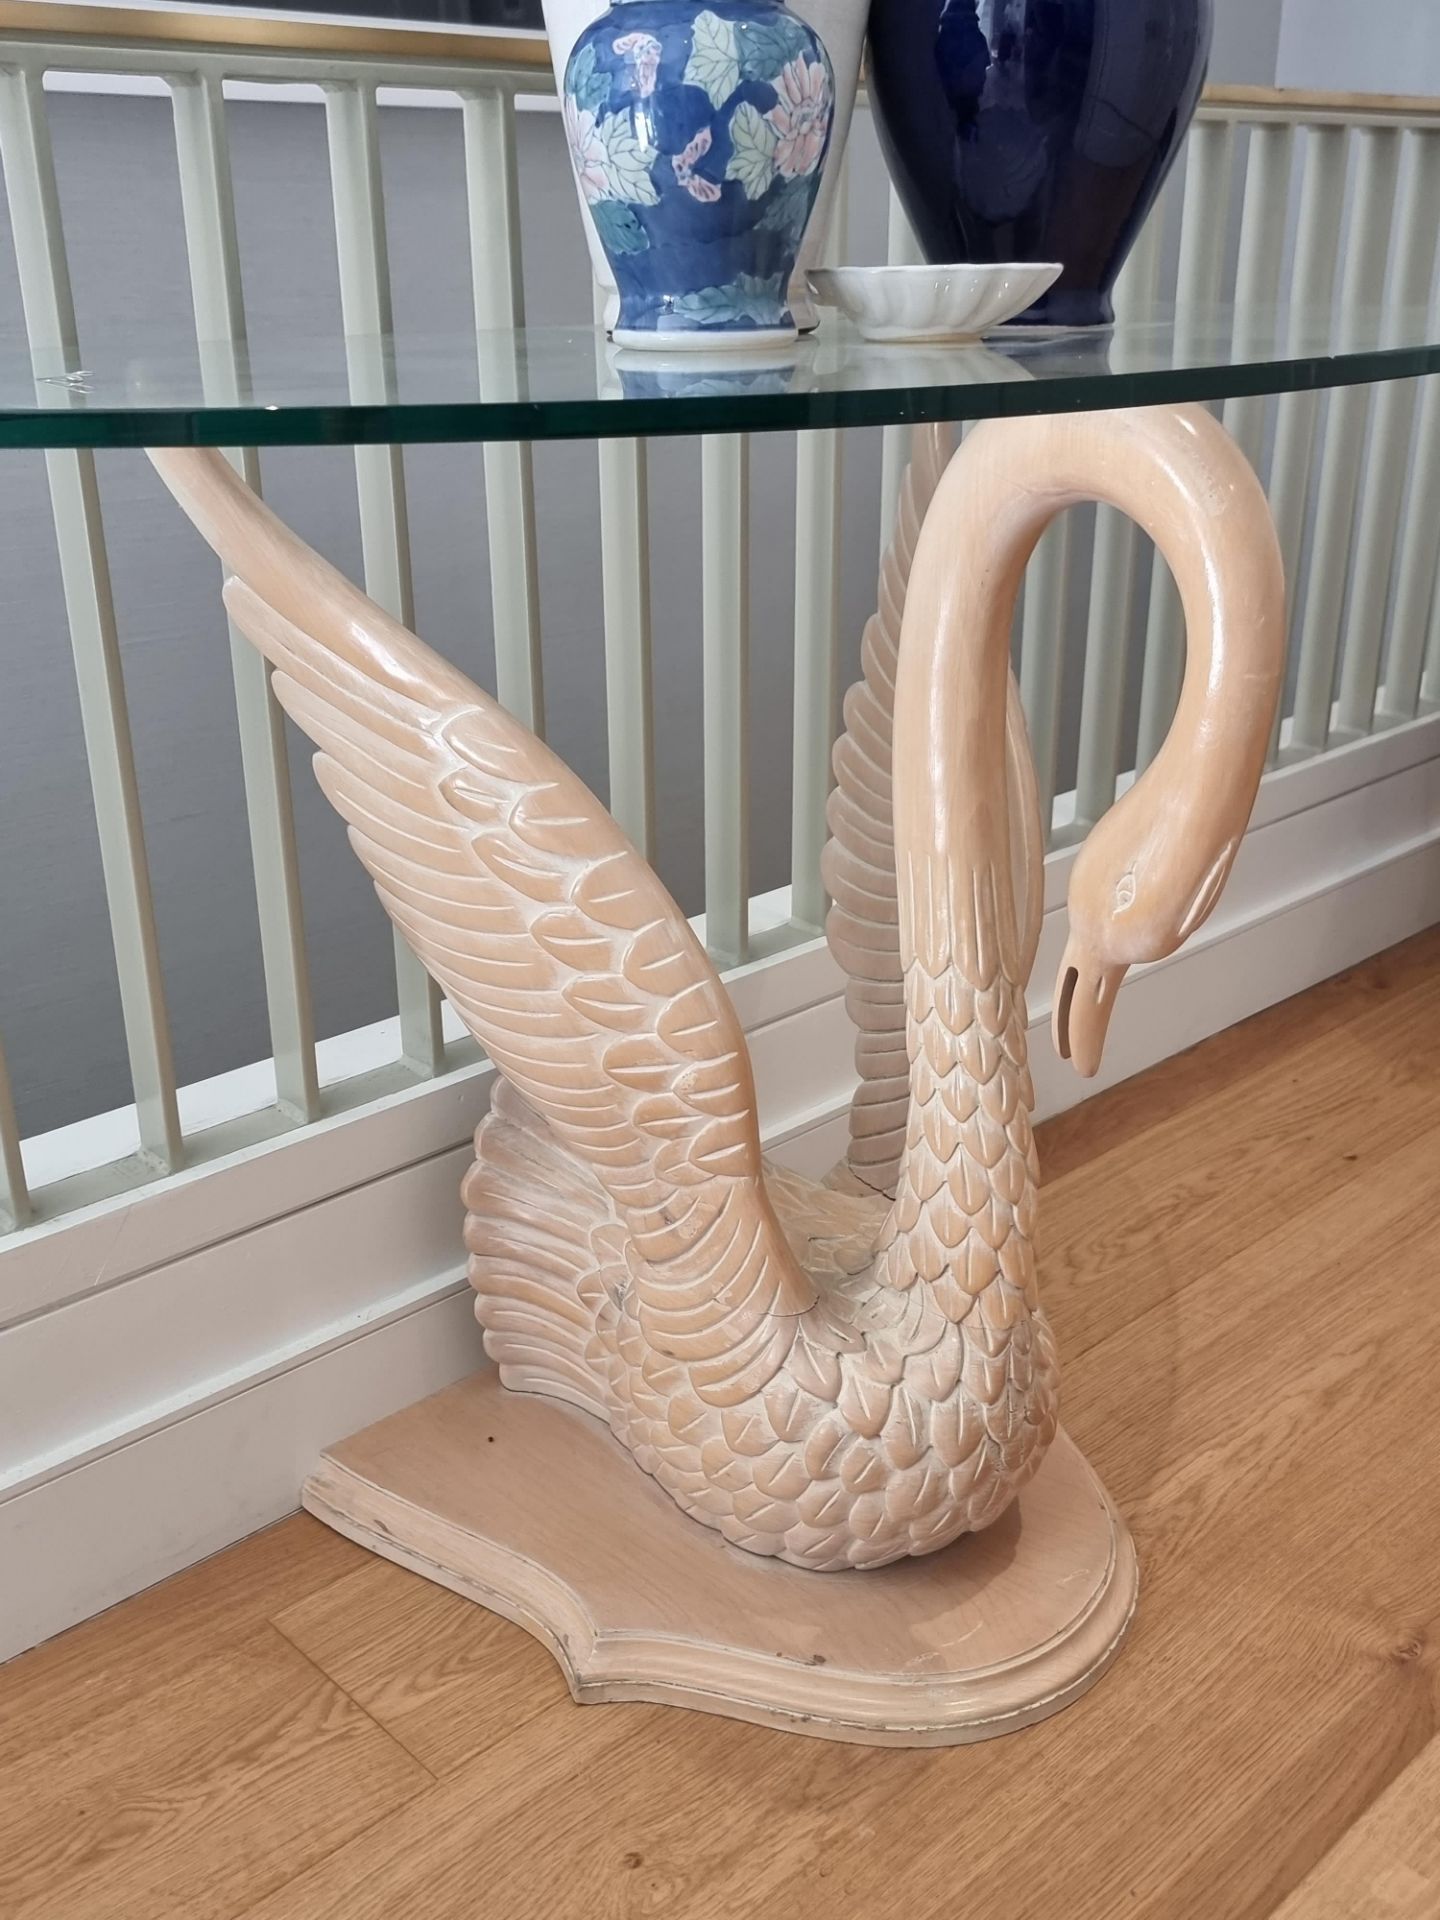 Swan Table Crafted In A Decadent Hollywood Regency Styling An intricately carved swan sculpture - Image 2 of 3